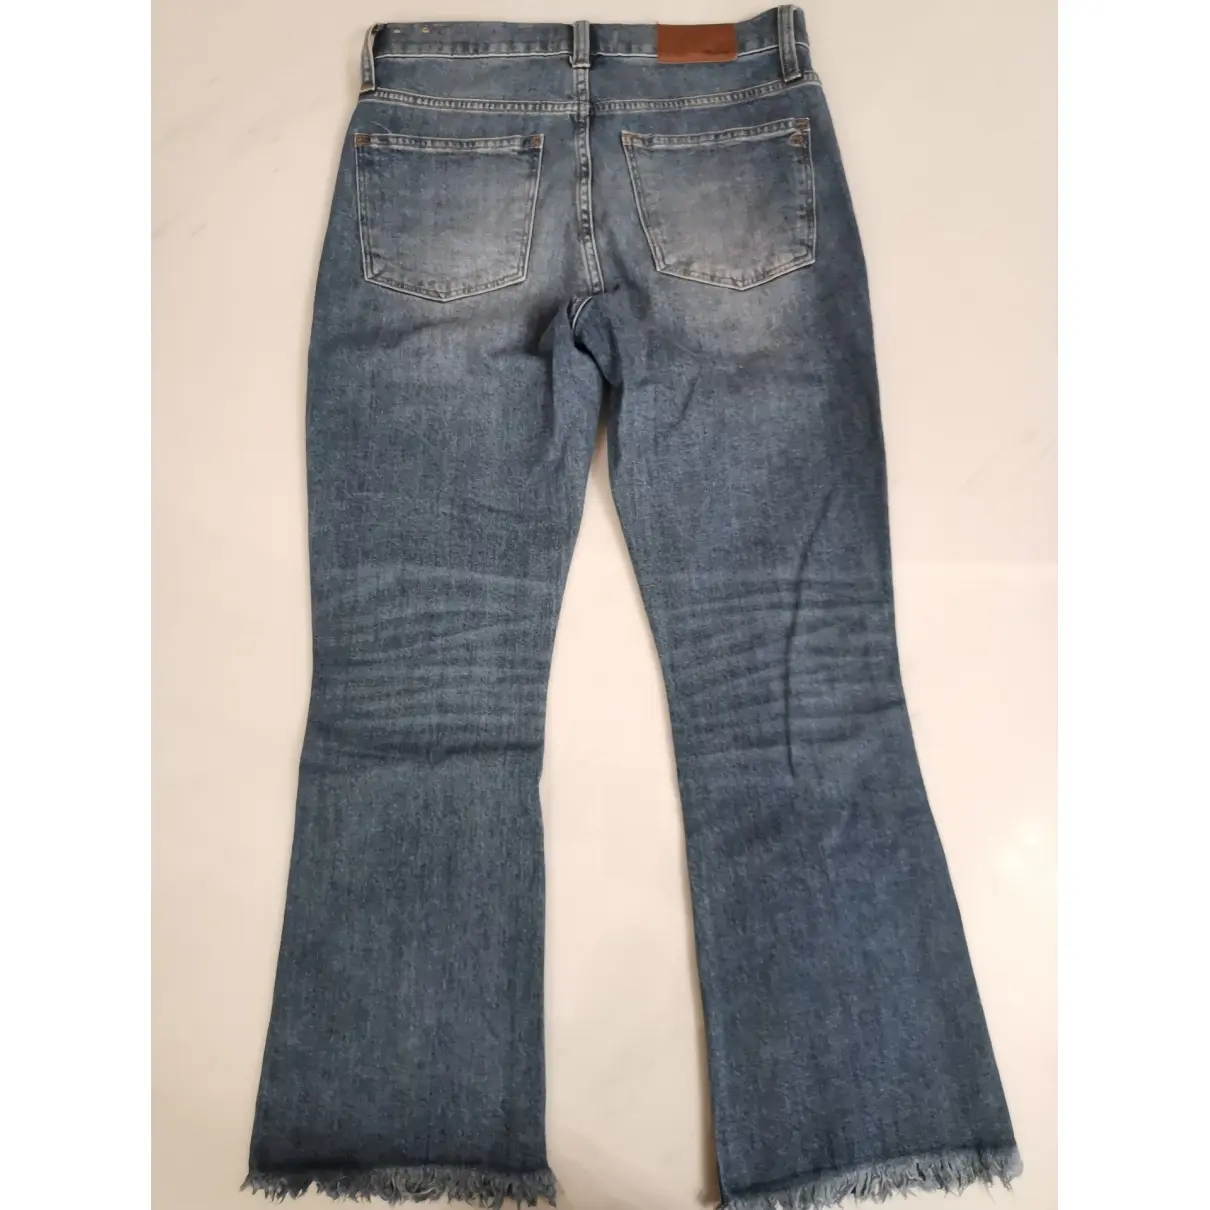 Madewell Large jeans for sale